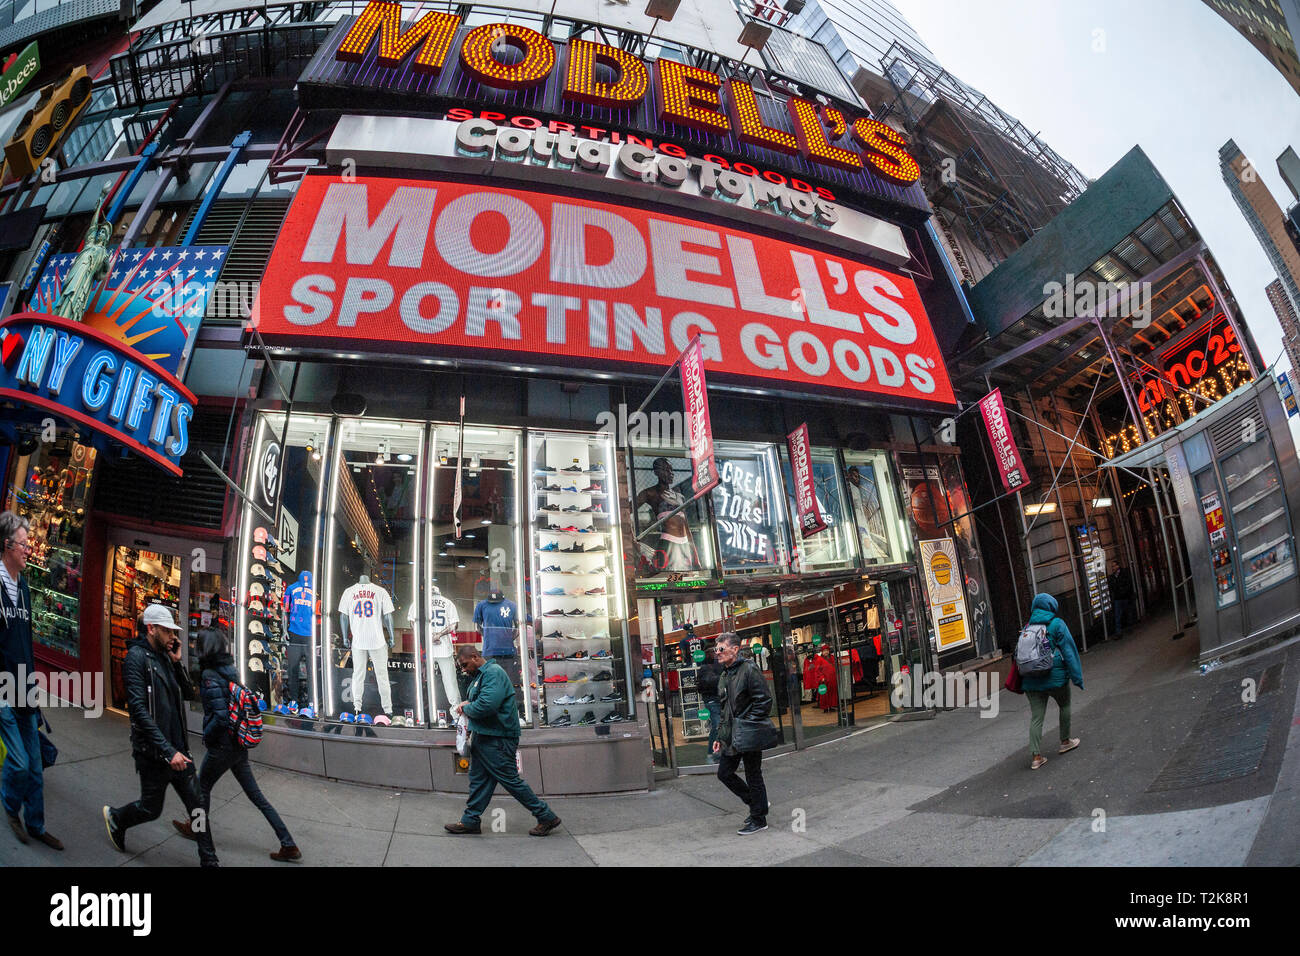 The Times Square location of the family-owned sporting goods chain,  Modell's is seen in New York on Friday, March 29, 2019. Facing pressure  from online and big box retailers Modell's Sporting Goods